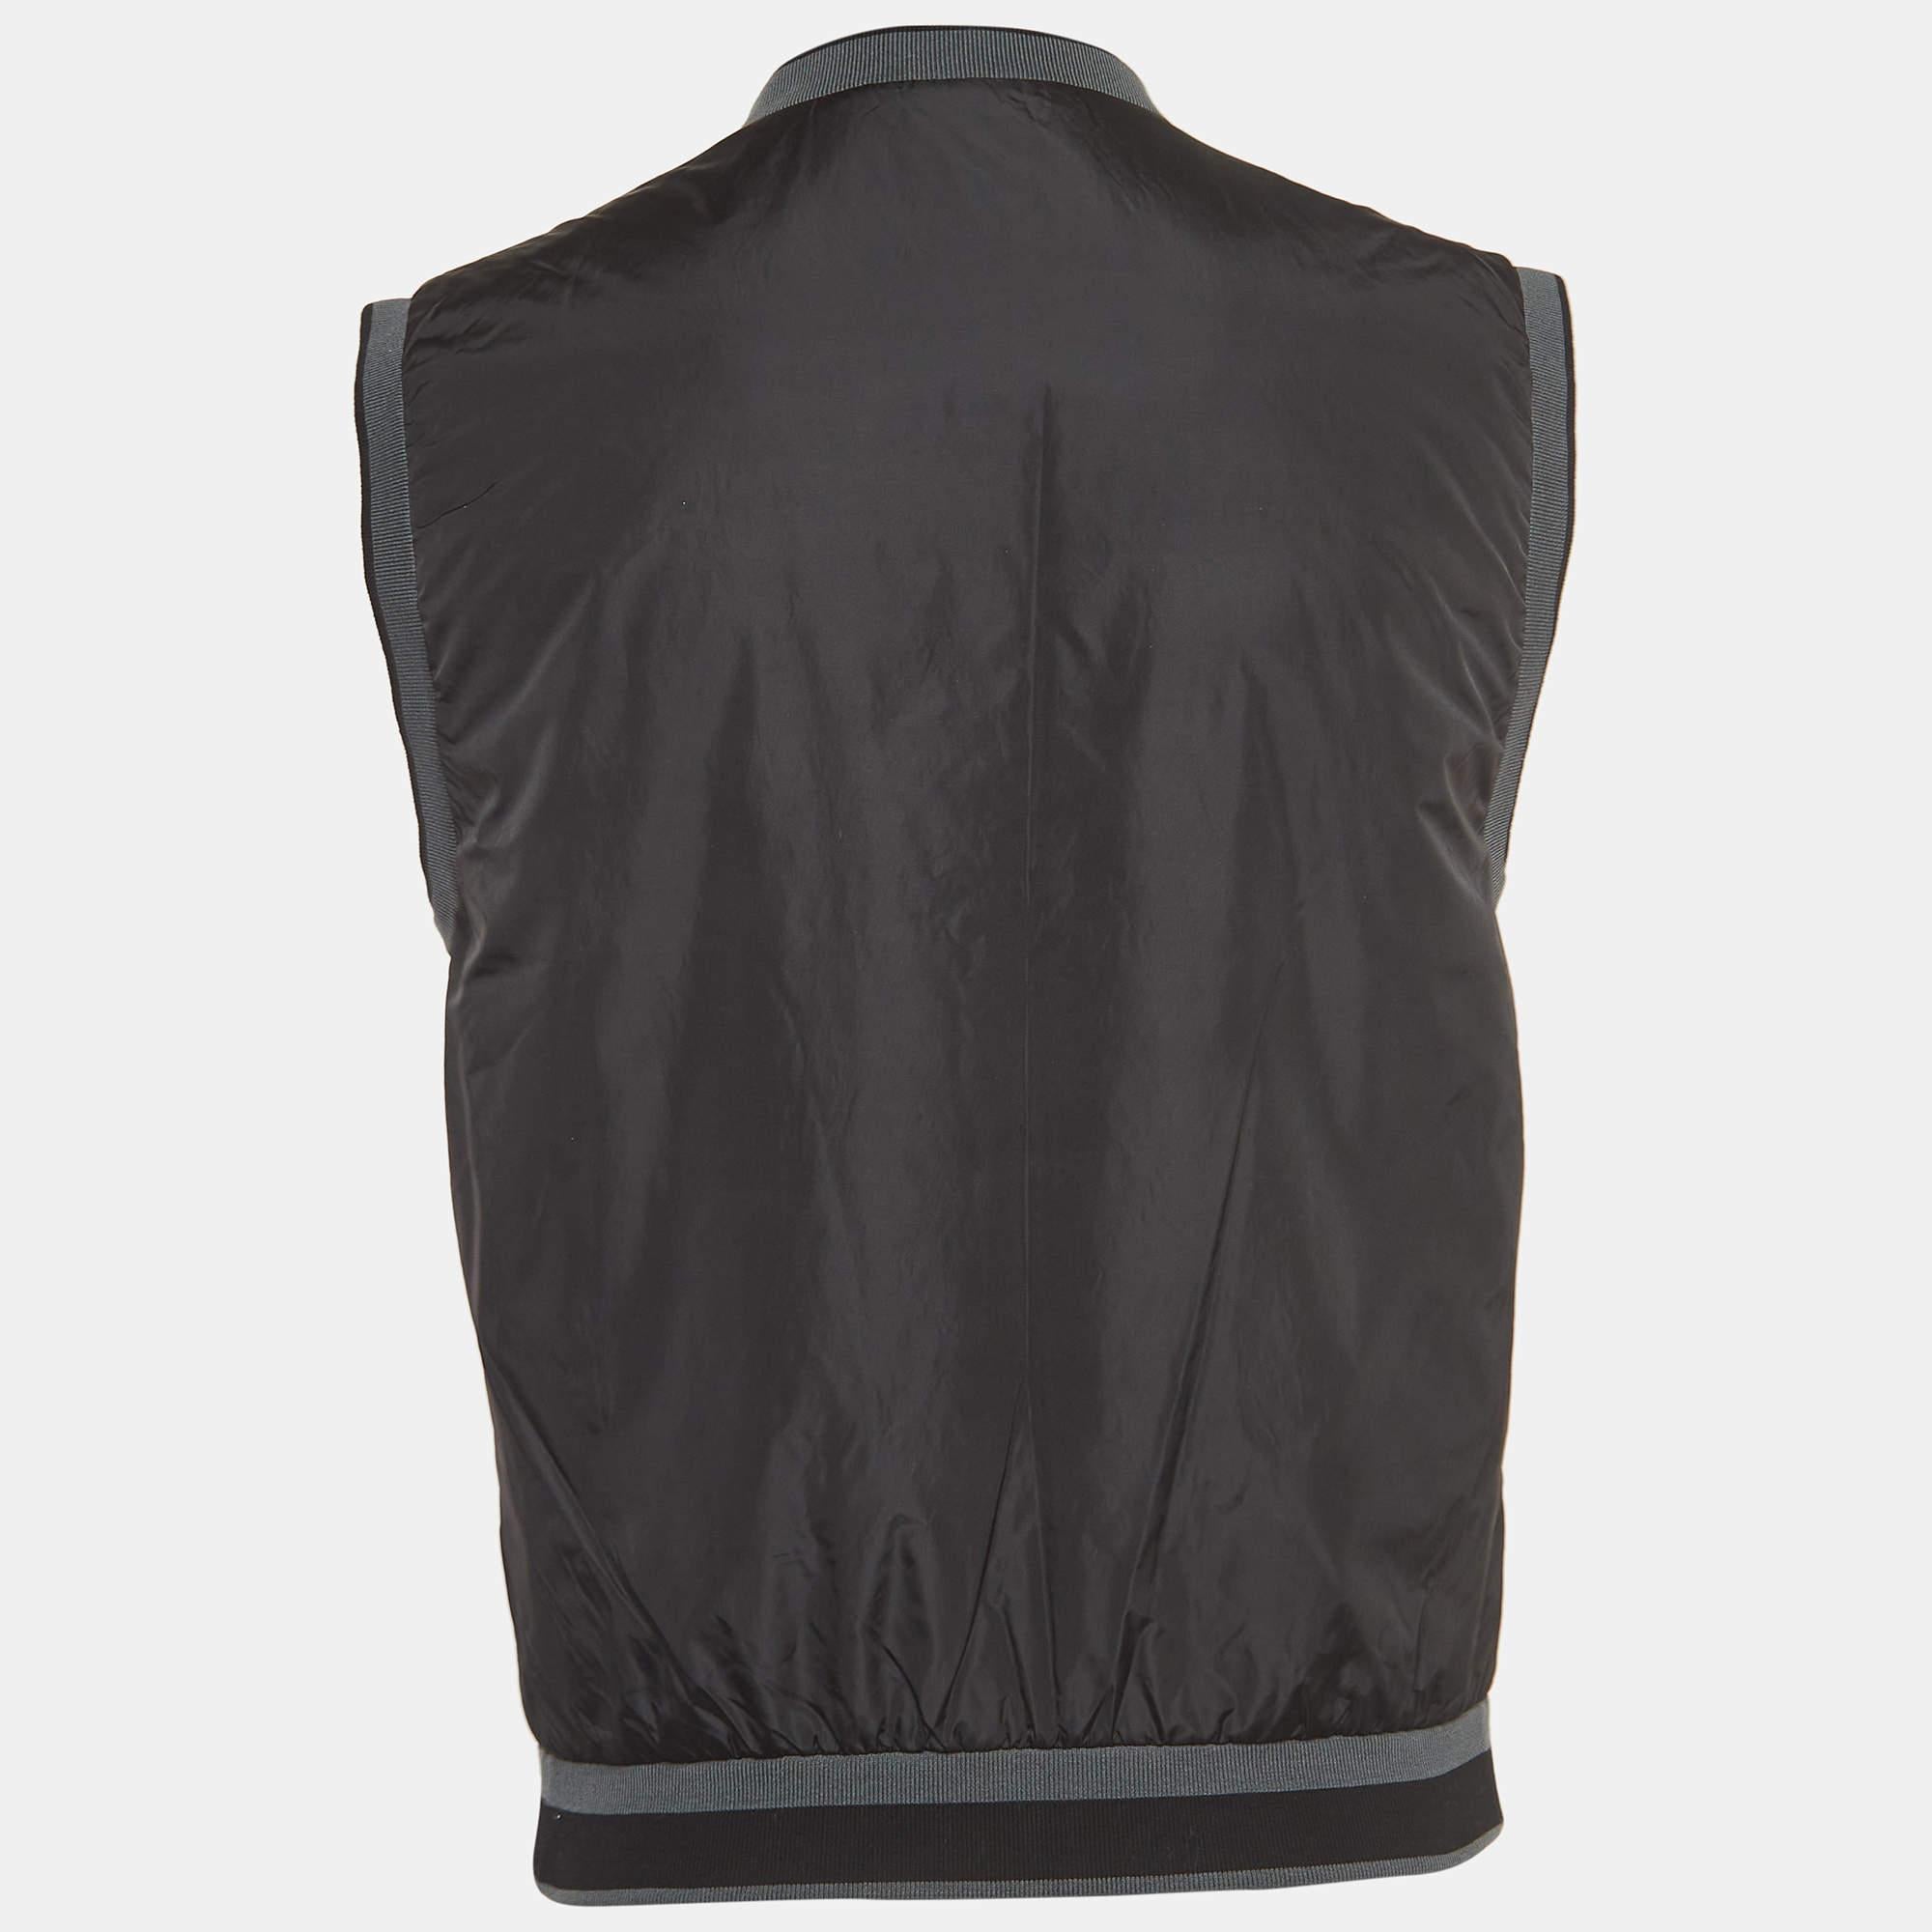 This gIlet has been designed by Dolce & Gabbana to accompany you all day long. Made using durable materials, the casual creation promises comfort and ease. It features a front zip closure, two pockets, and a signature crown plaque at the front.

